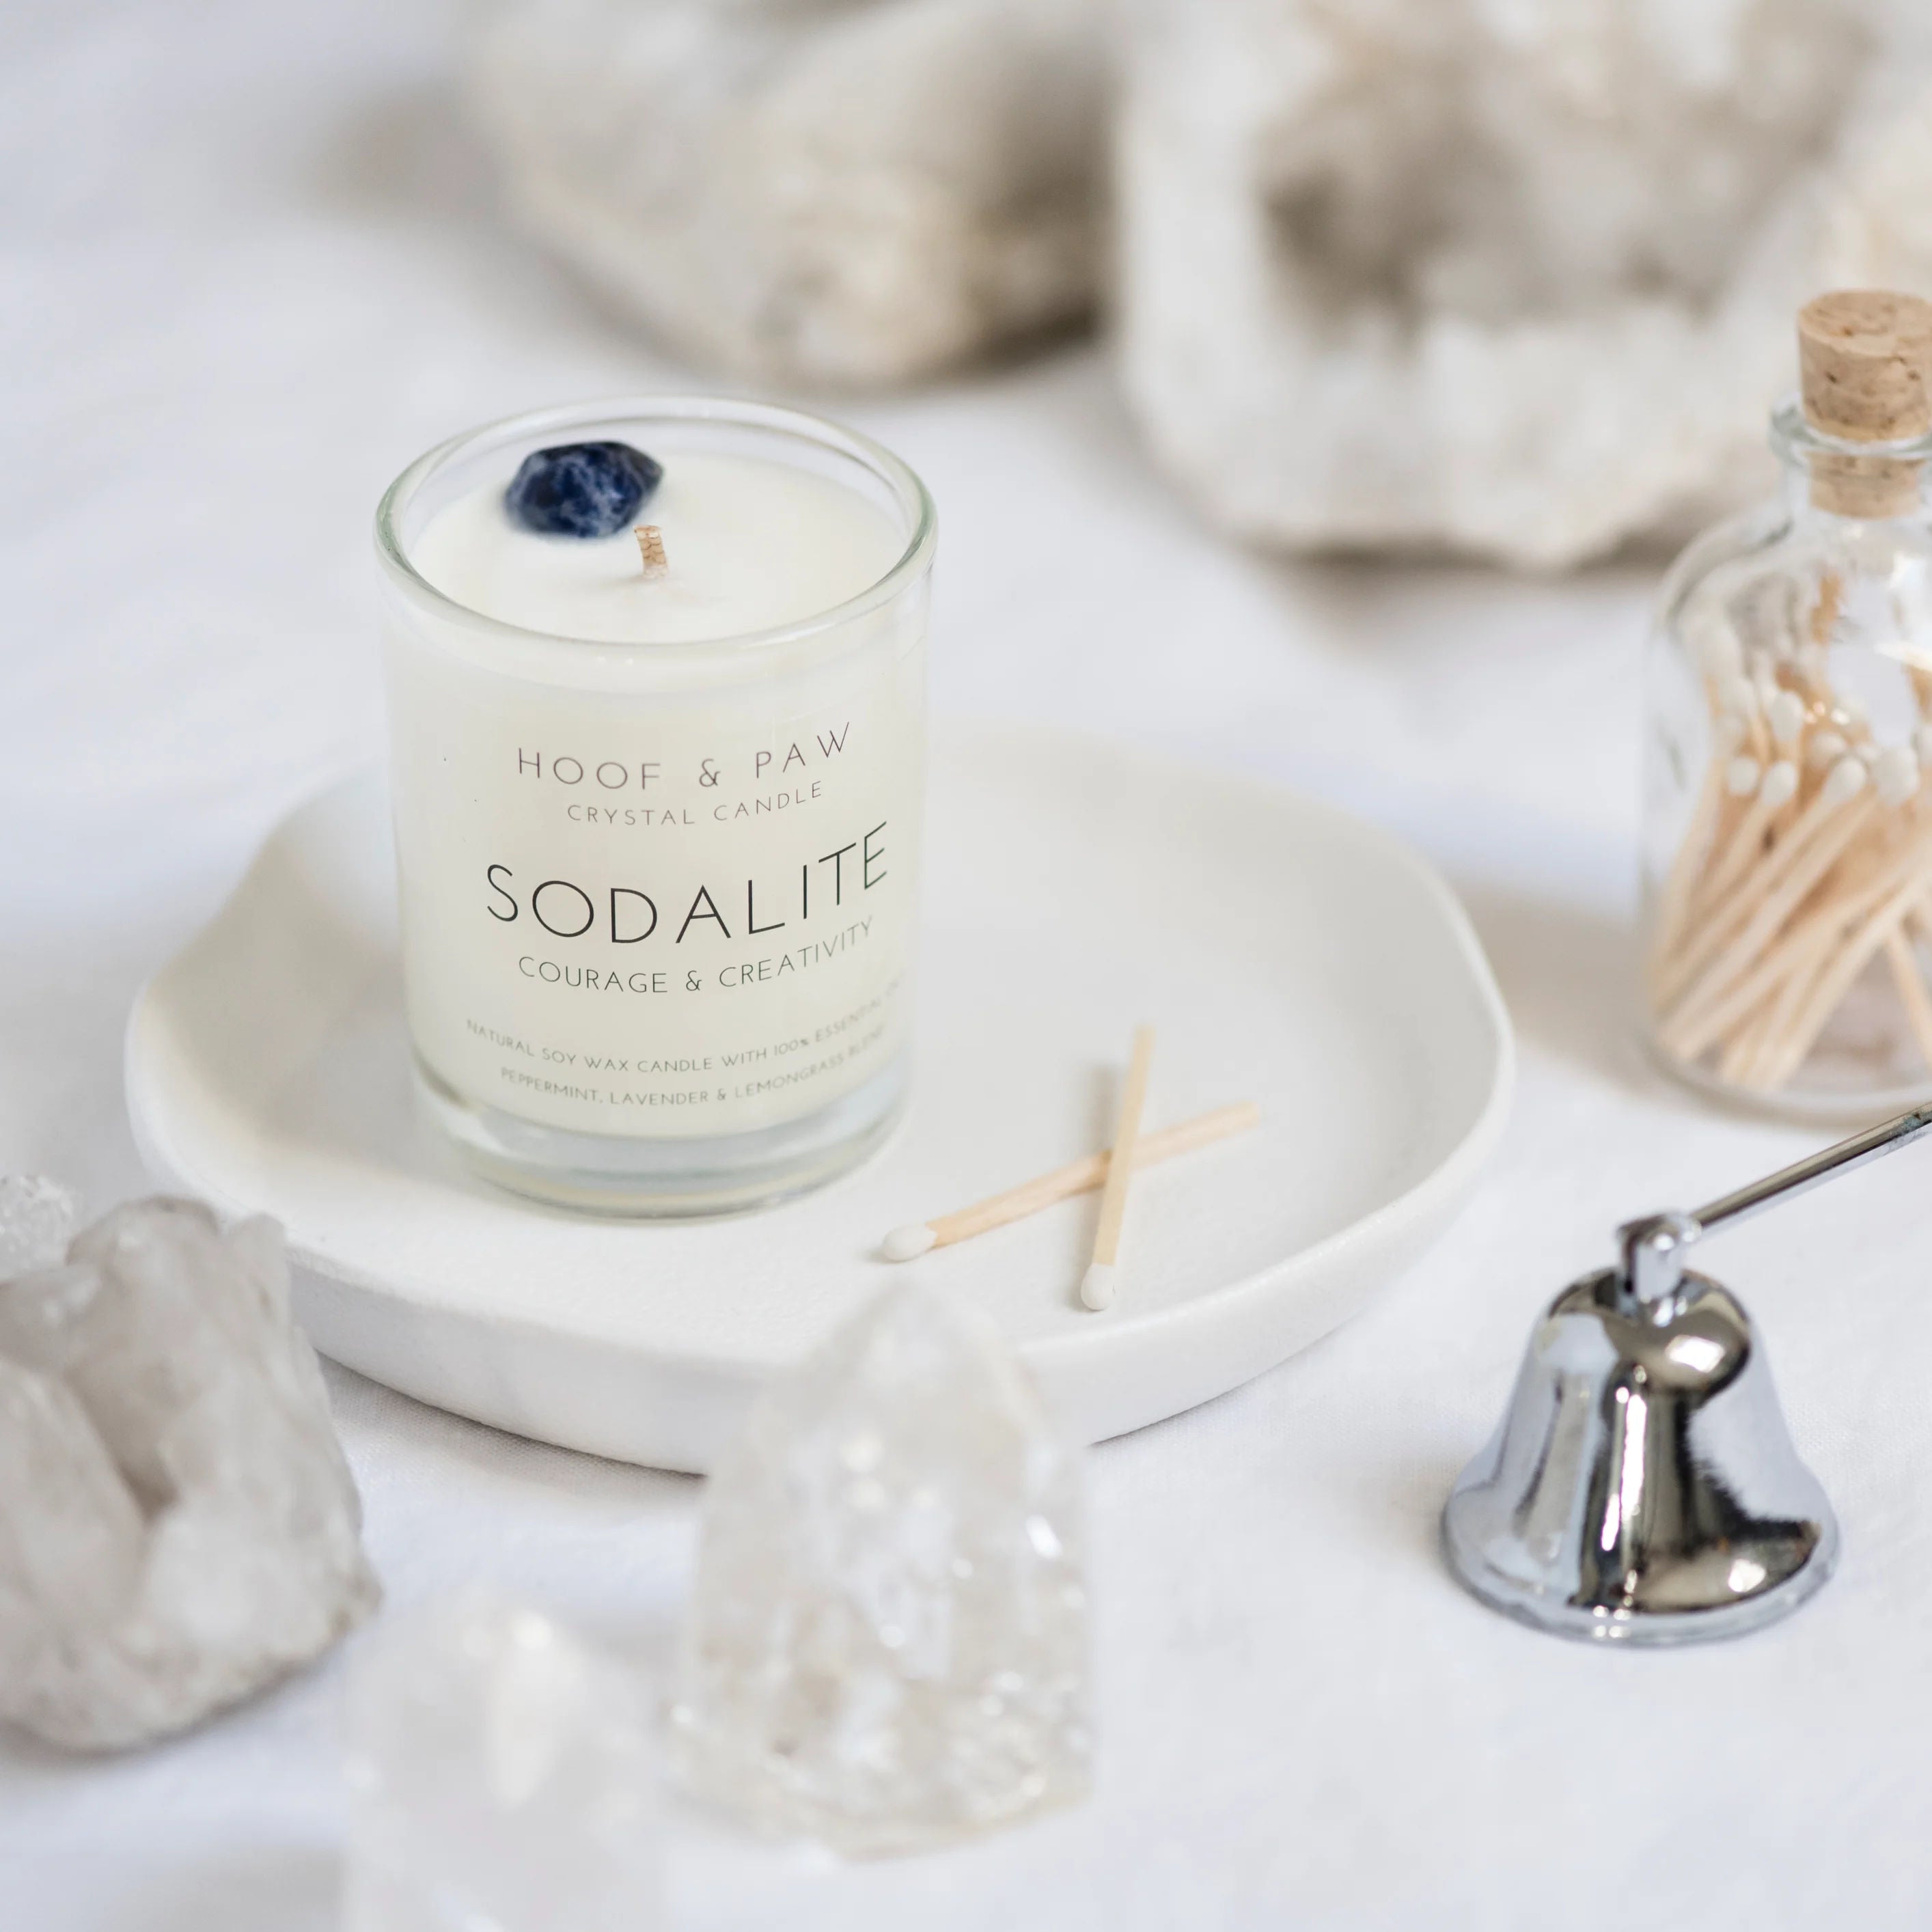 Sodalite Travel Candle ~ Soy Wax Candle